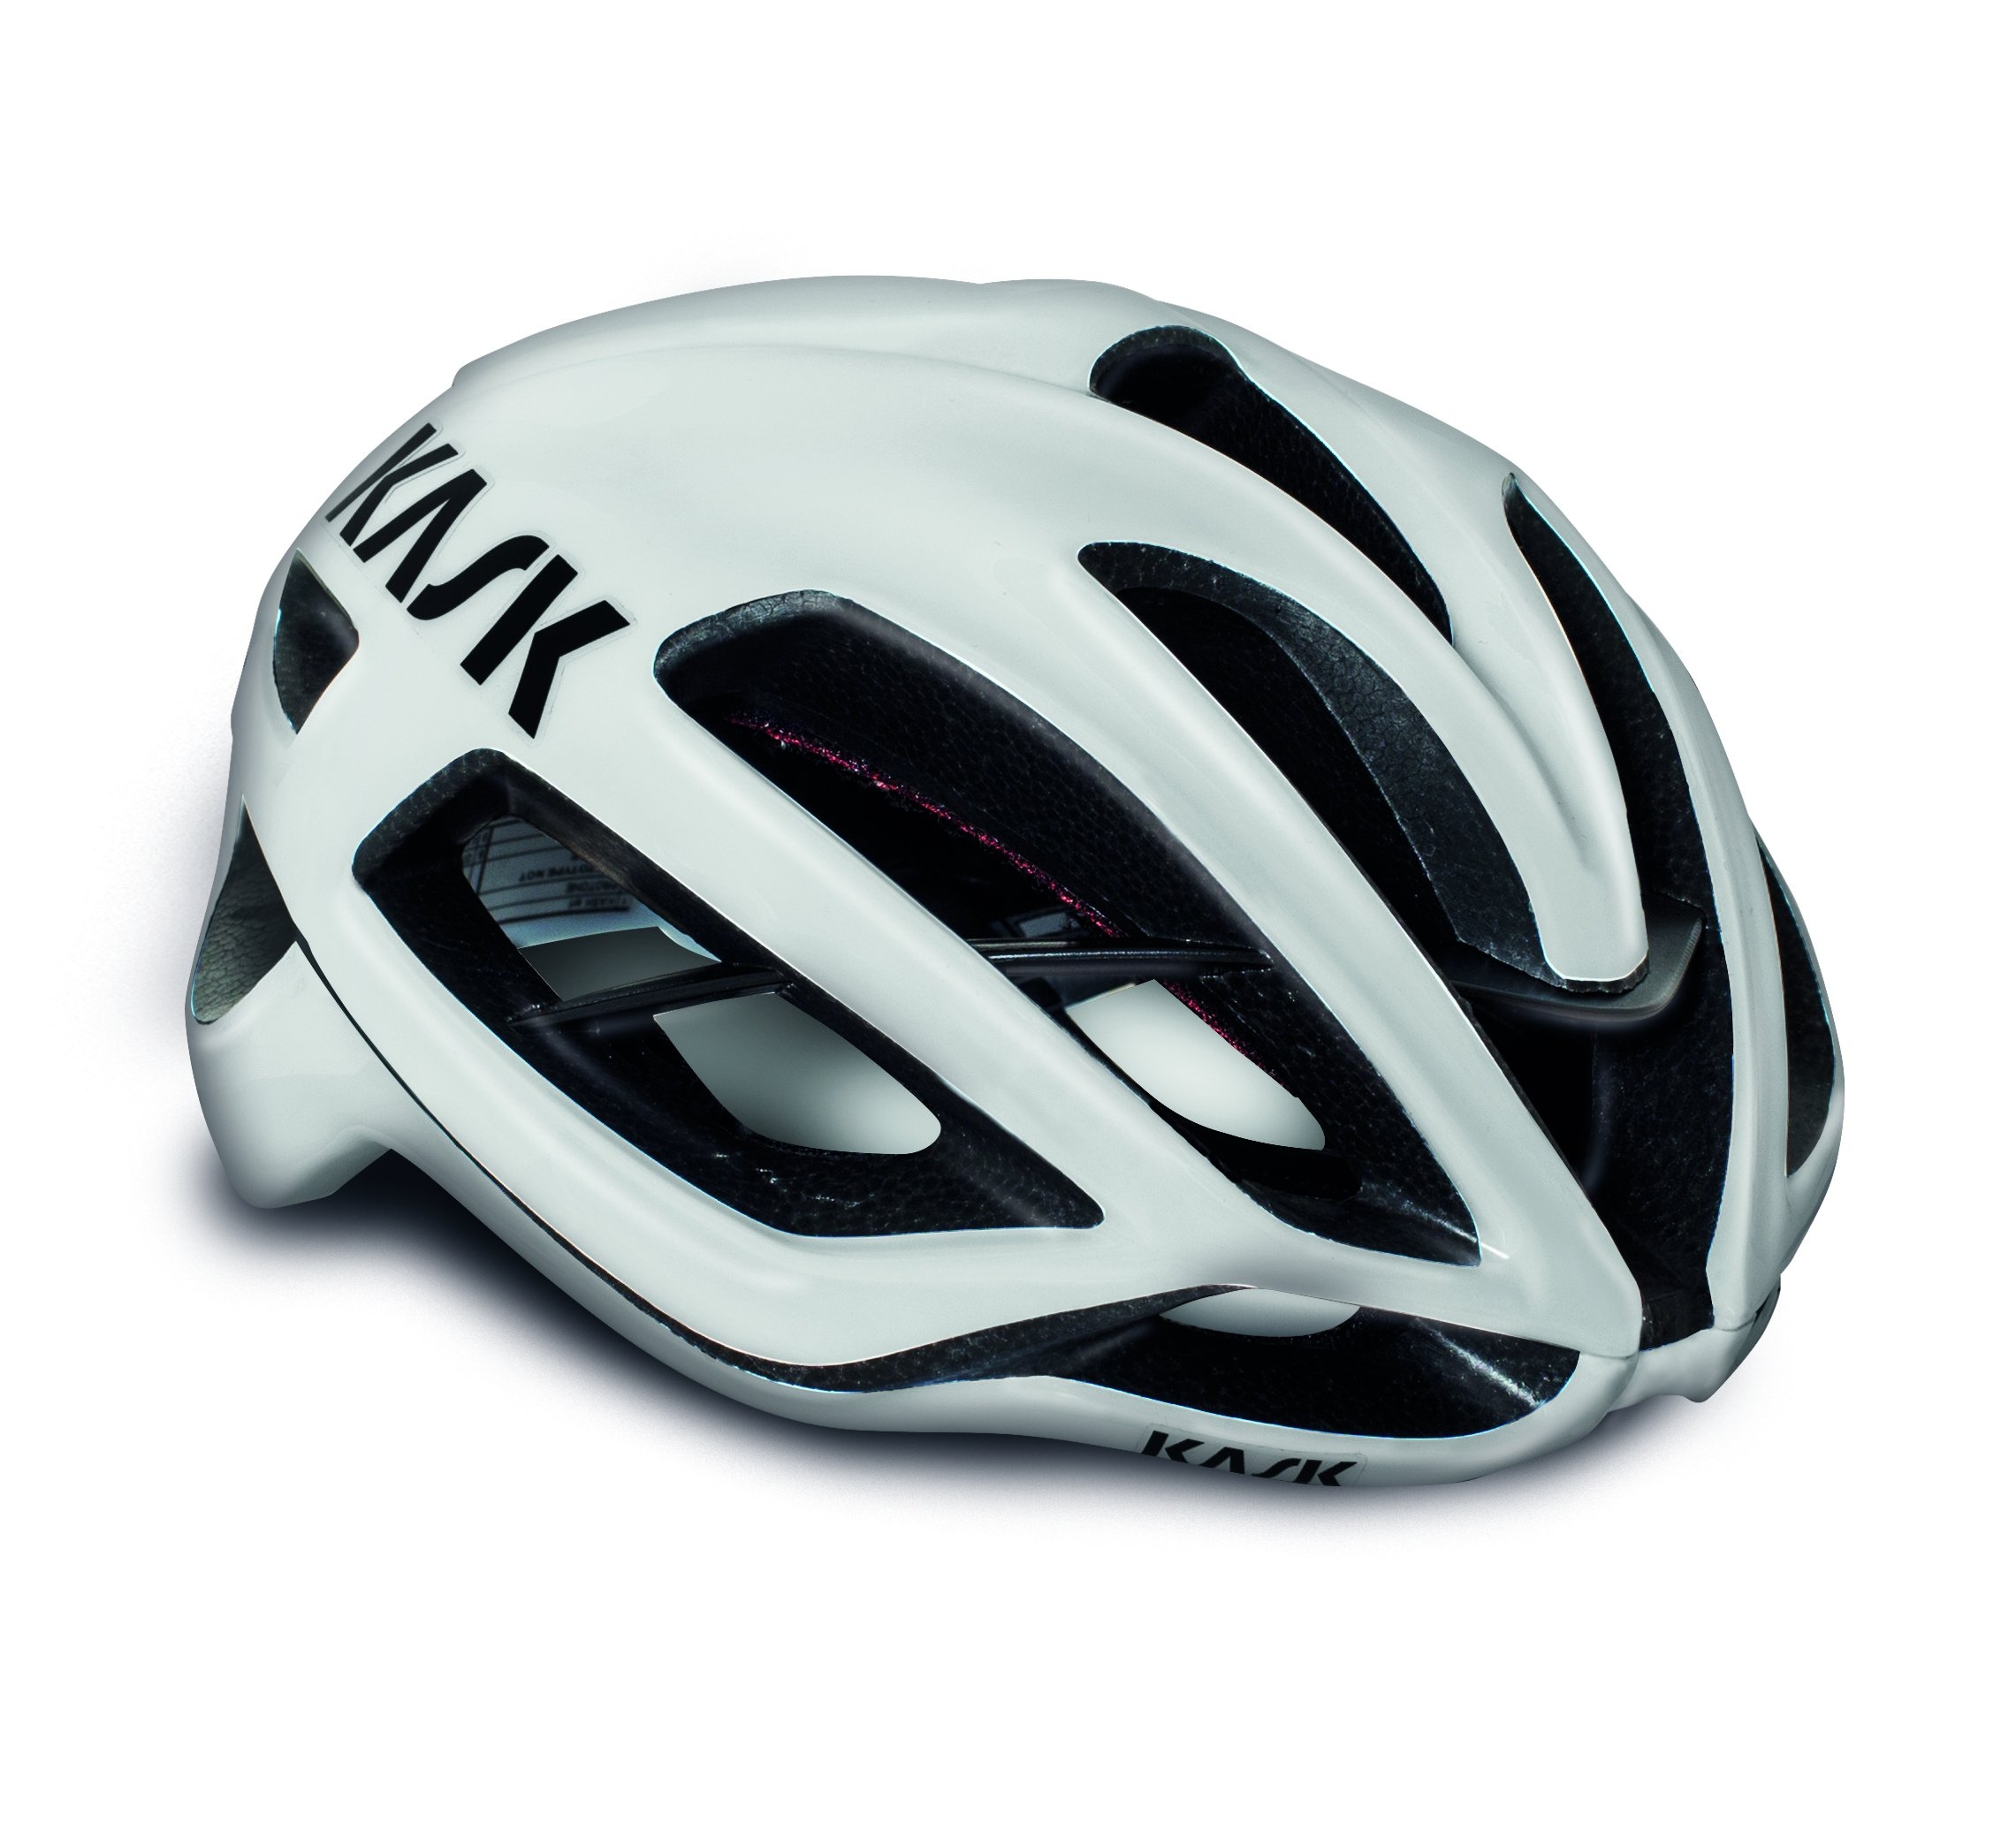 KASK Protone Road Cycling Helmet – S / White